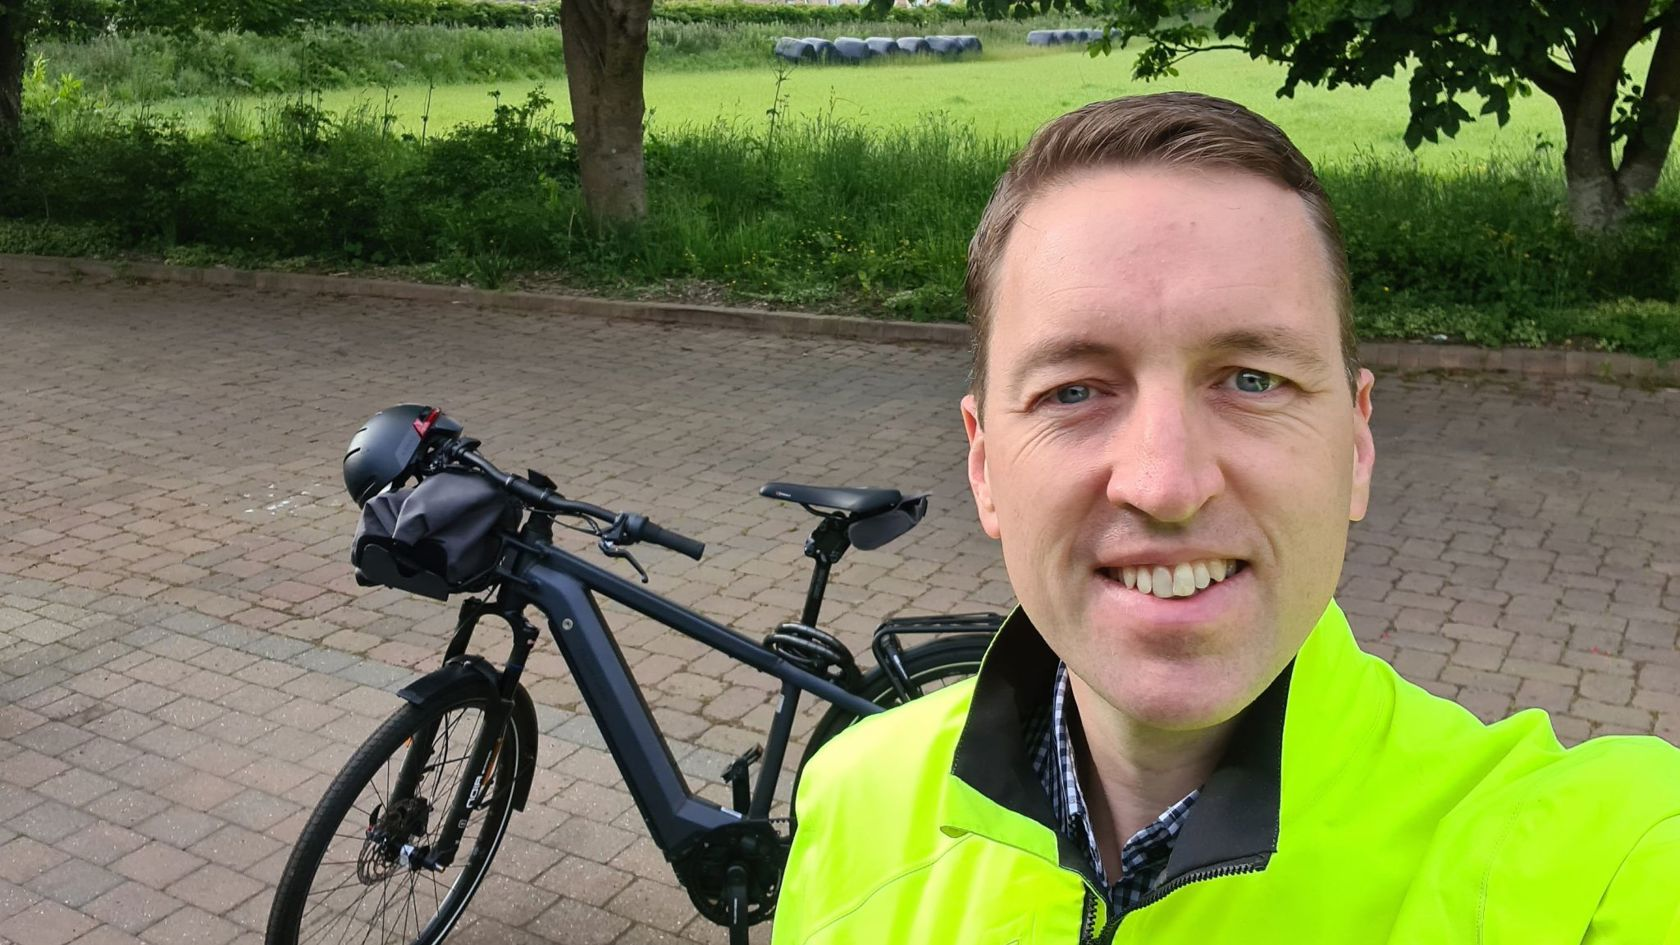 Stuart Murphy, Jrsey Electricity Head of Customer Experience and Communications. wearing a reflective jacket standing next to his electric bike